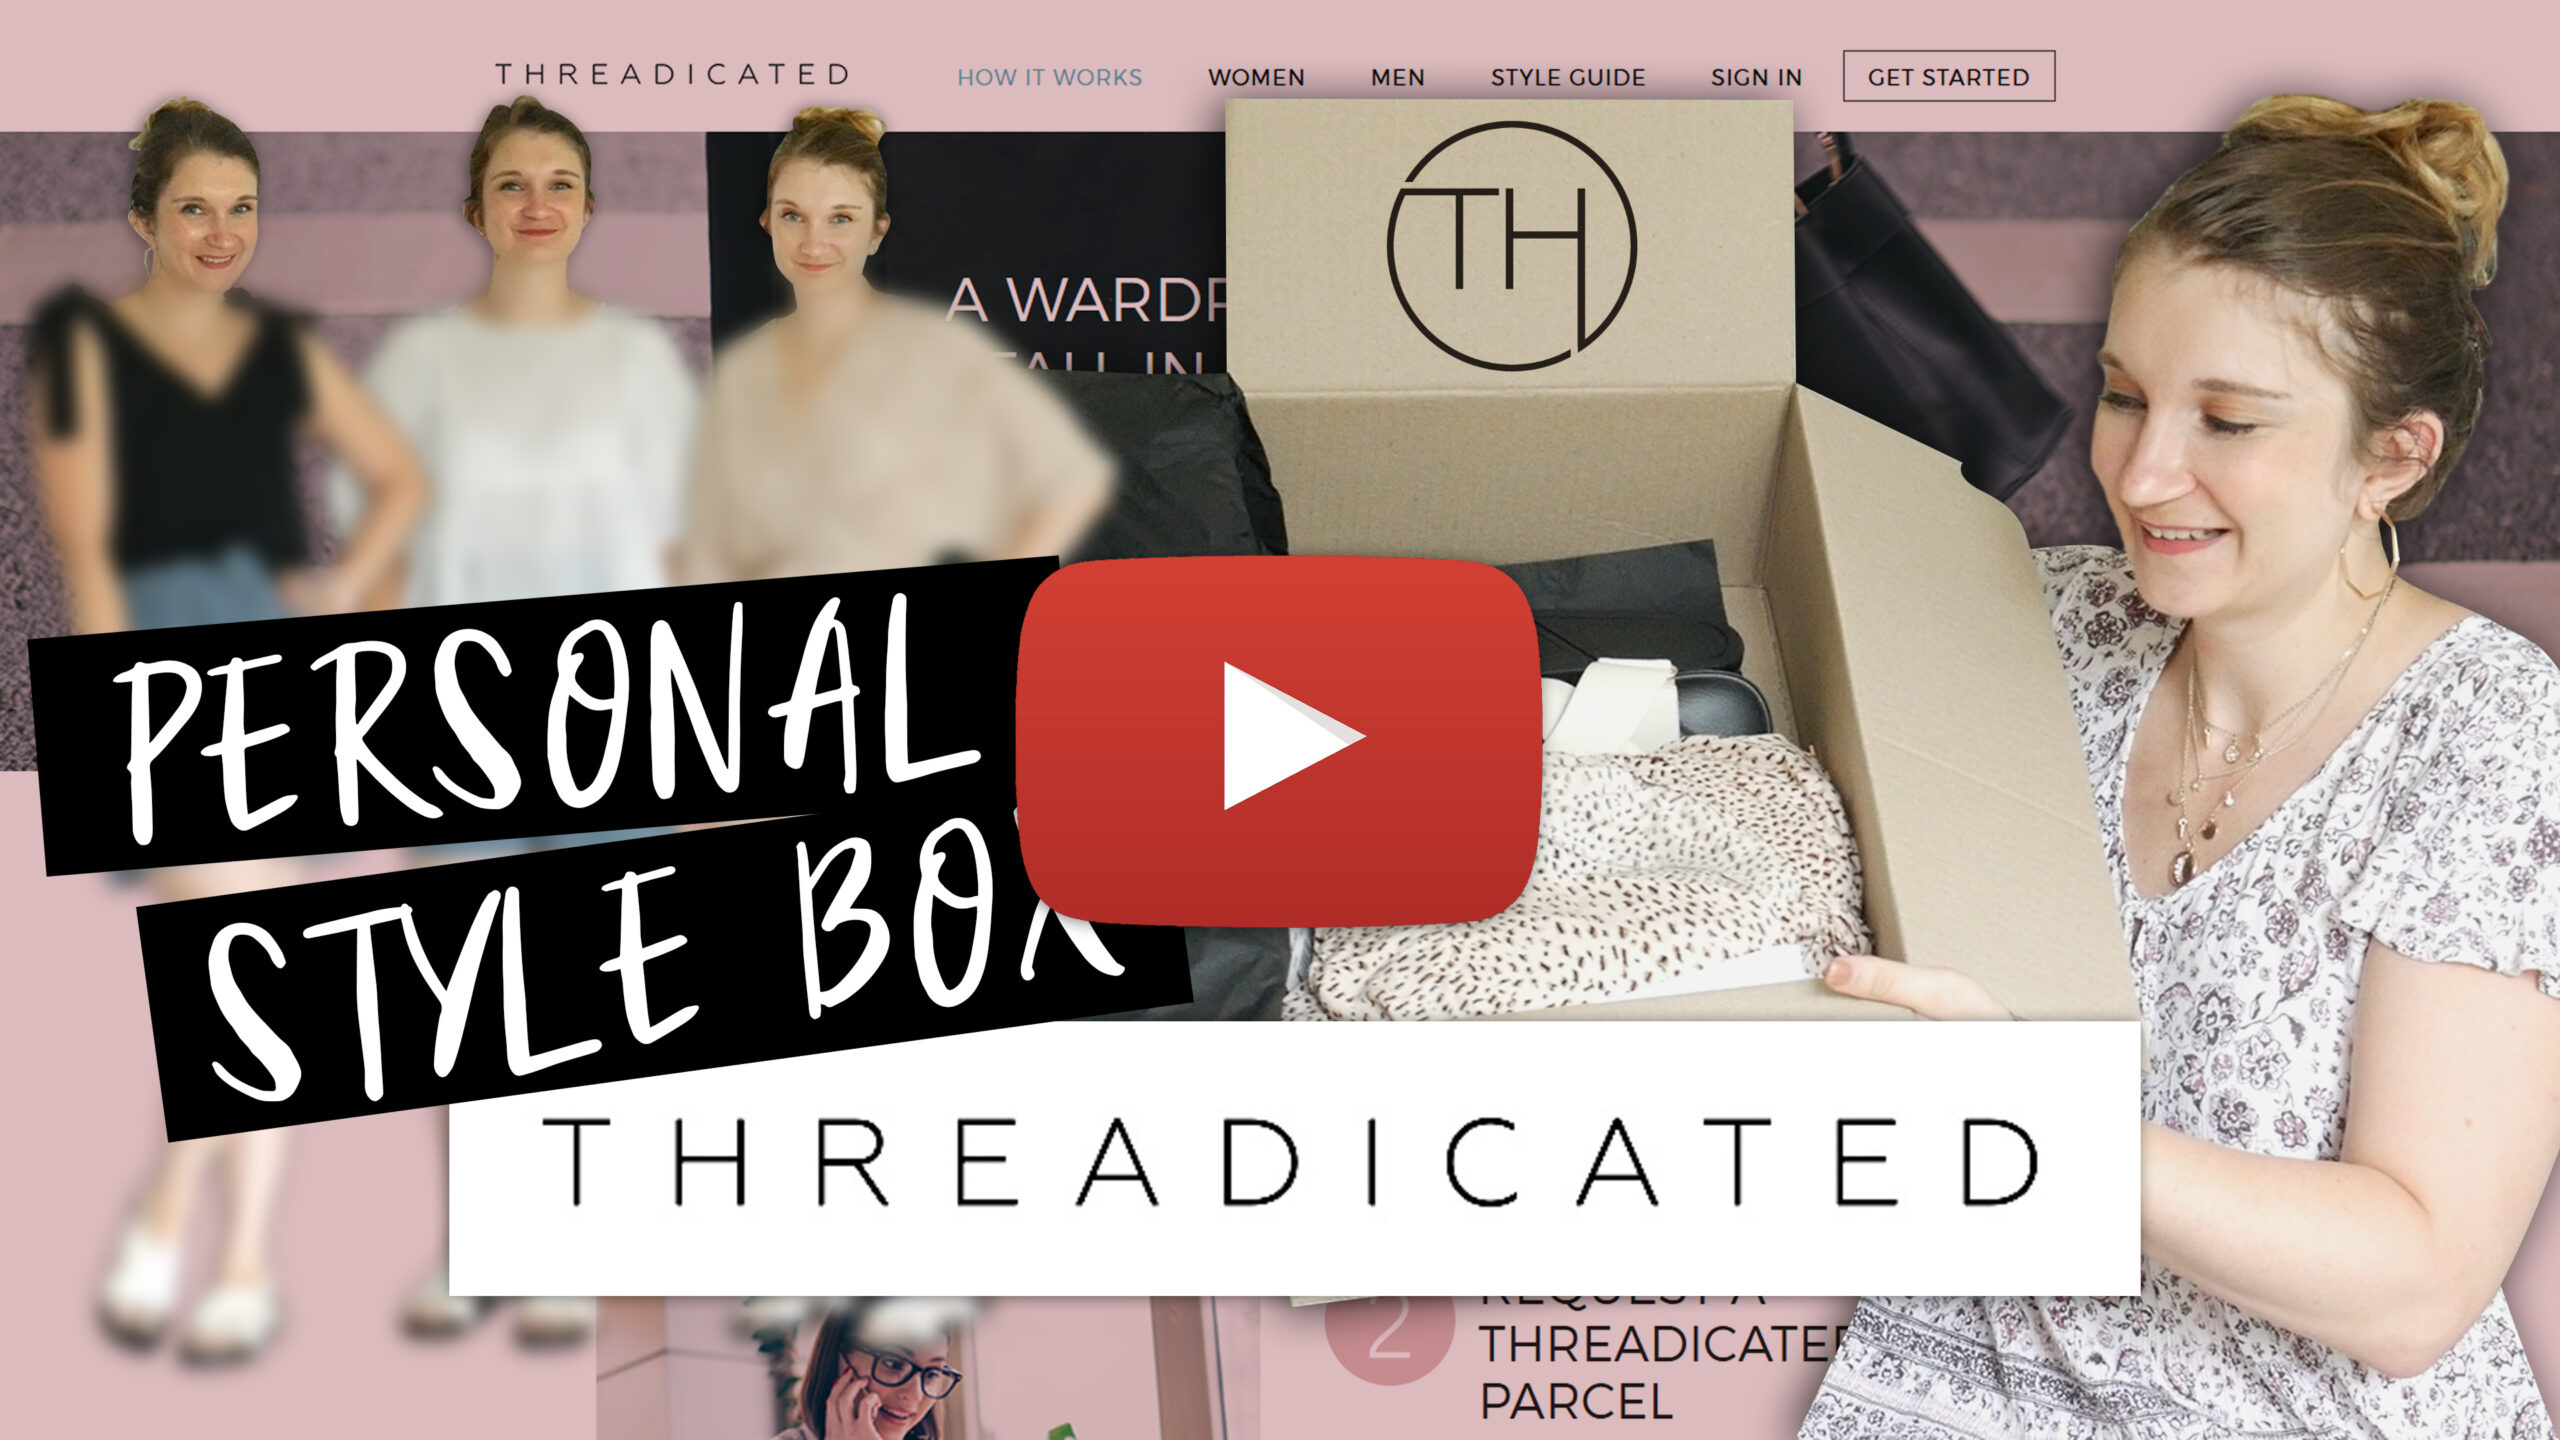 Threadicated Clothing Subscription Personal Style Box Review YouTube Thumbnail Play Button